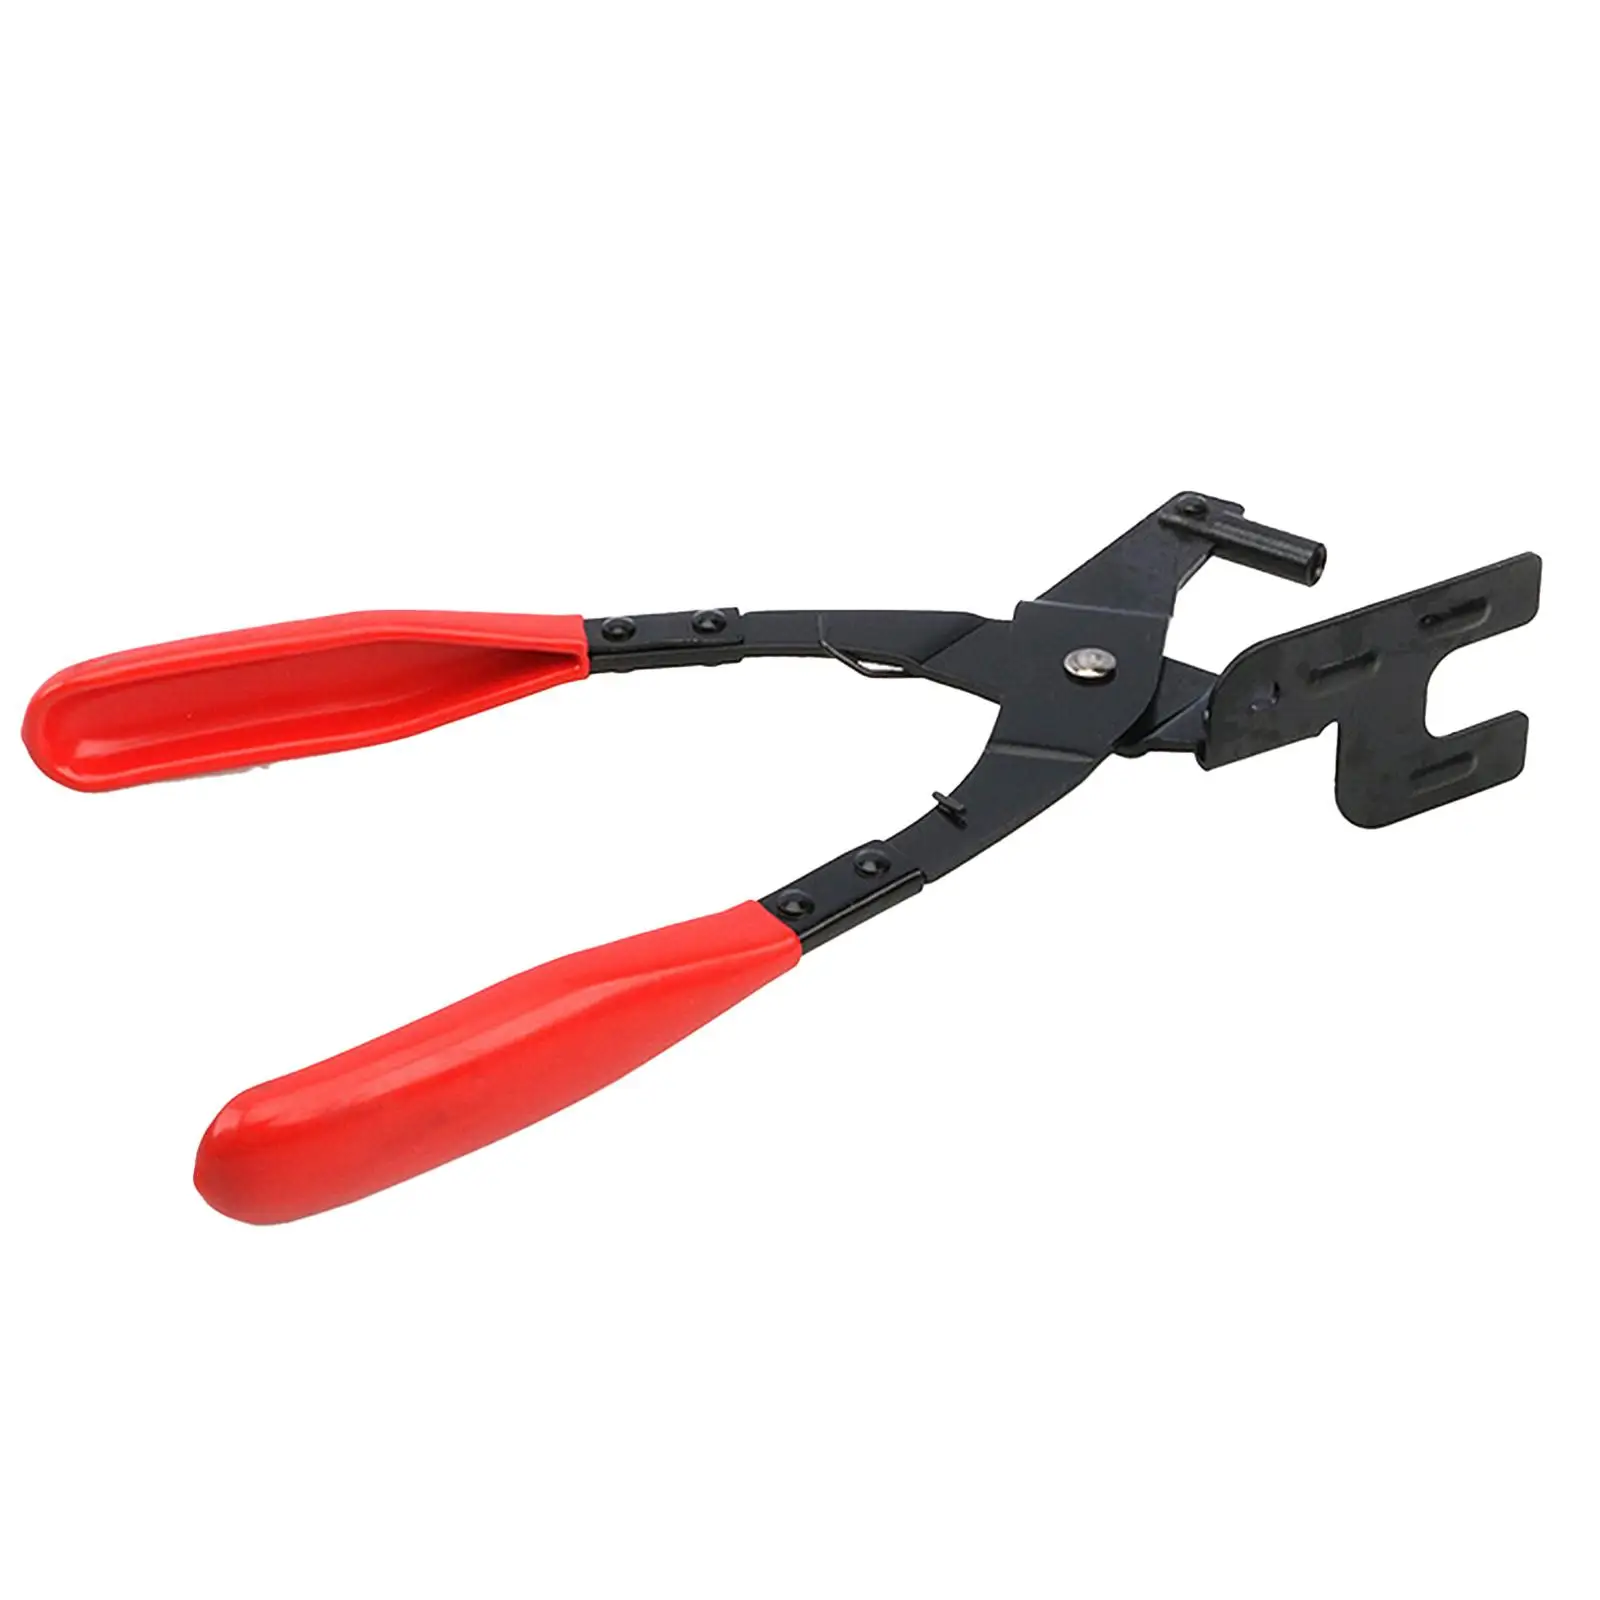 Exhaust Hanger Removal Pliers Hand Operated Tools Anti Slip Muffler Hanger